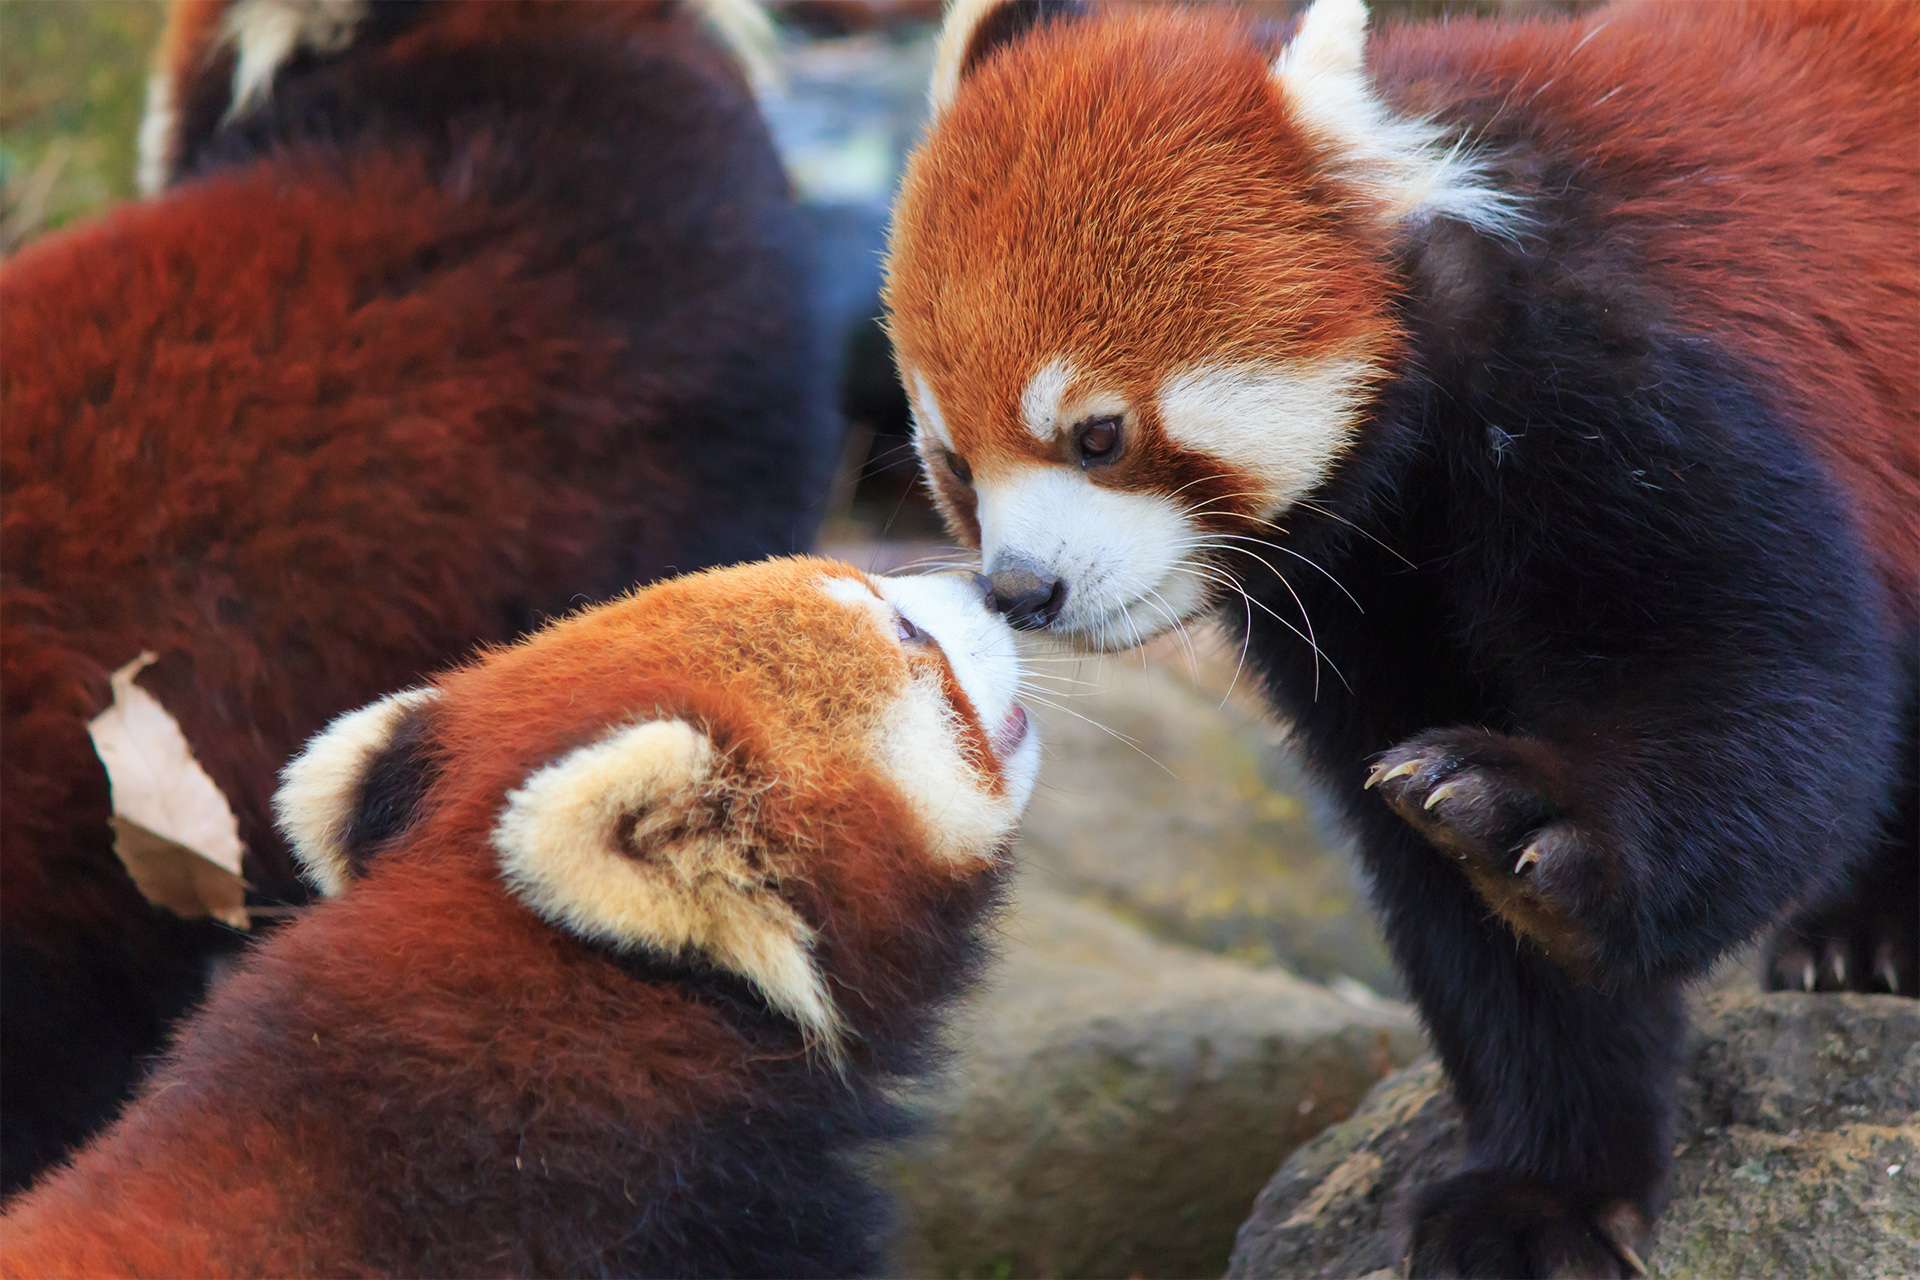 Two red pandas in captivity kissing noses and playing